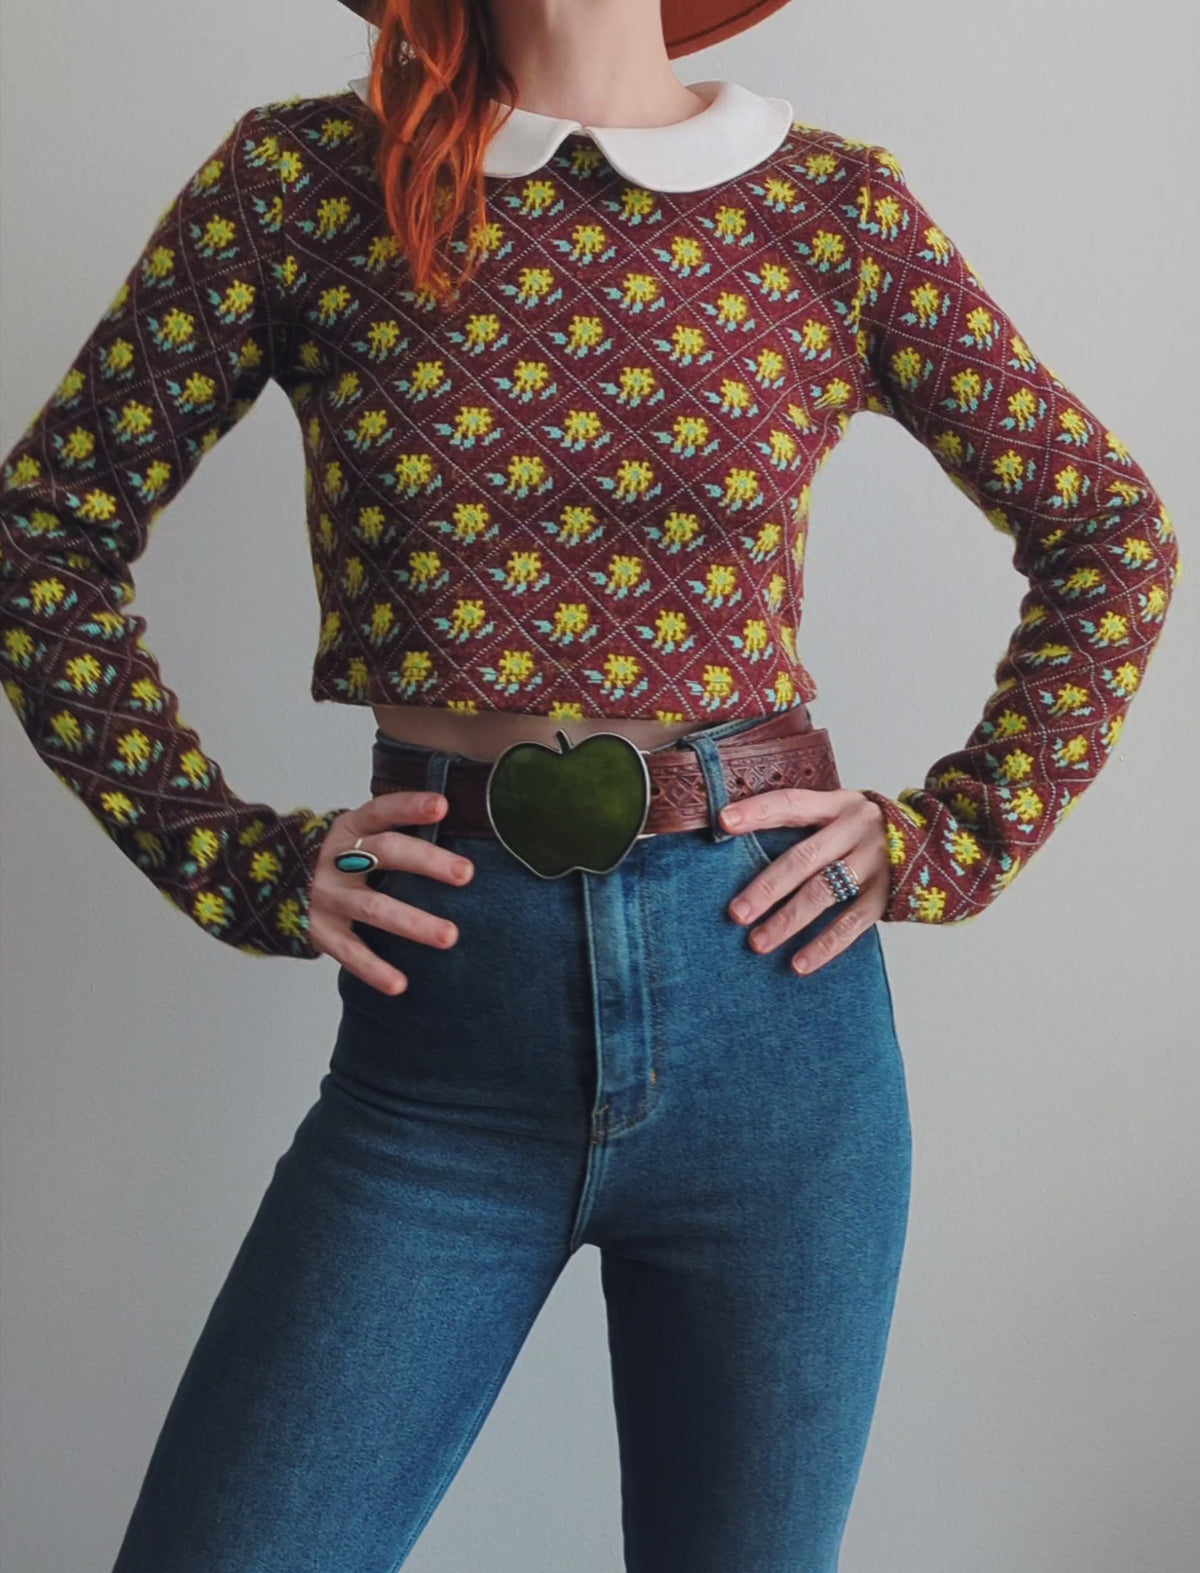 60s inspired Dolly Peter Pan Collar Burgundy Floral Knit Long Sleeve Crop Top by Glamorous UK